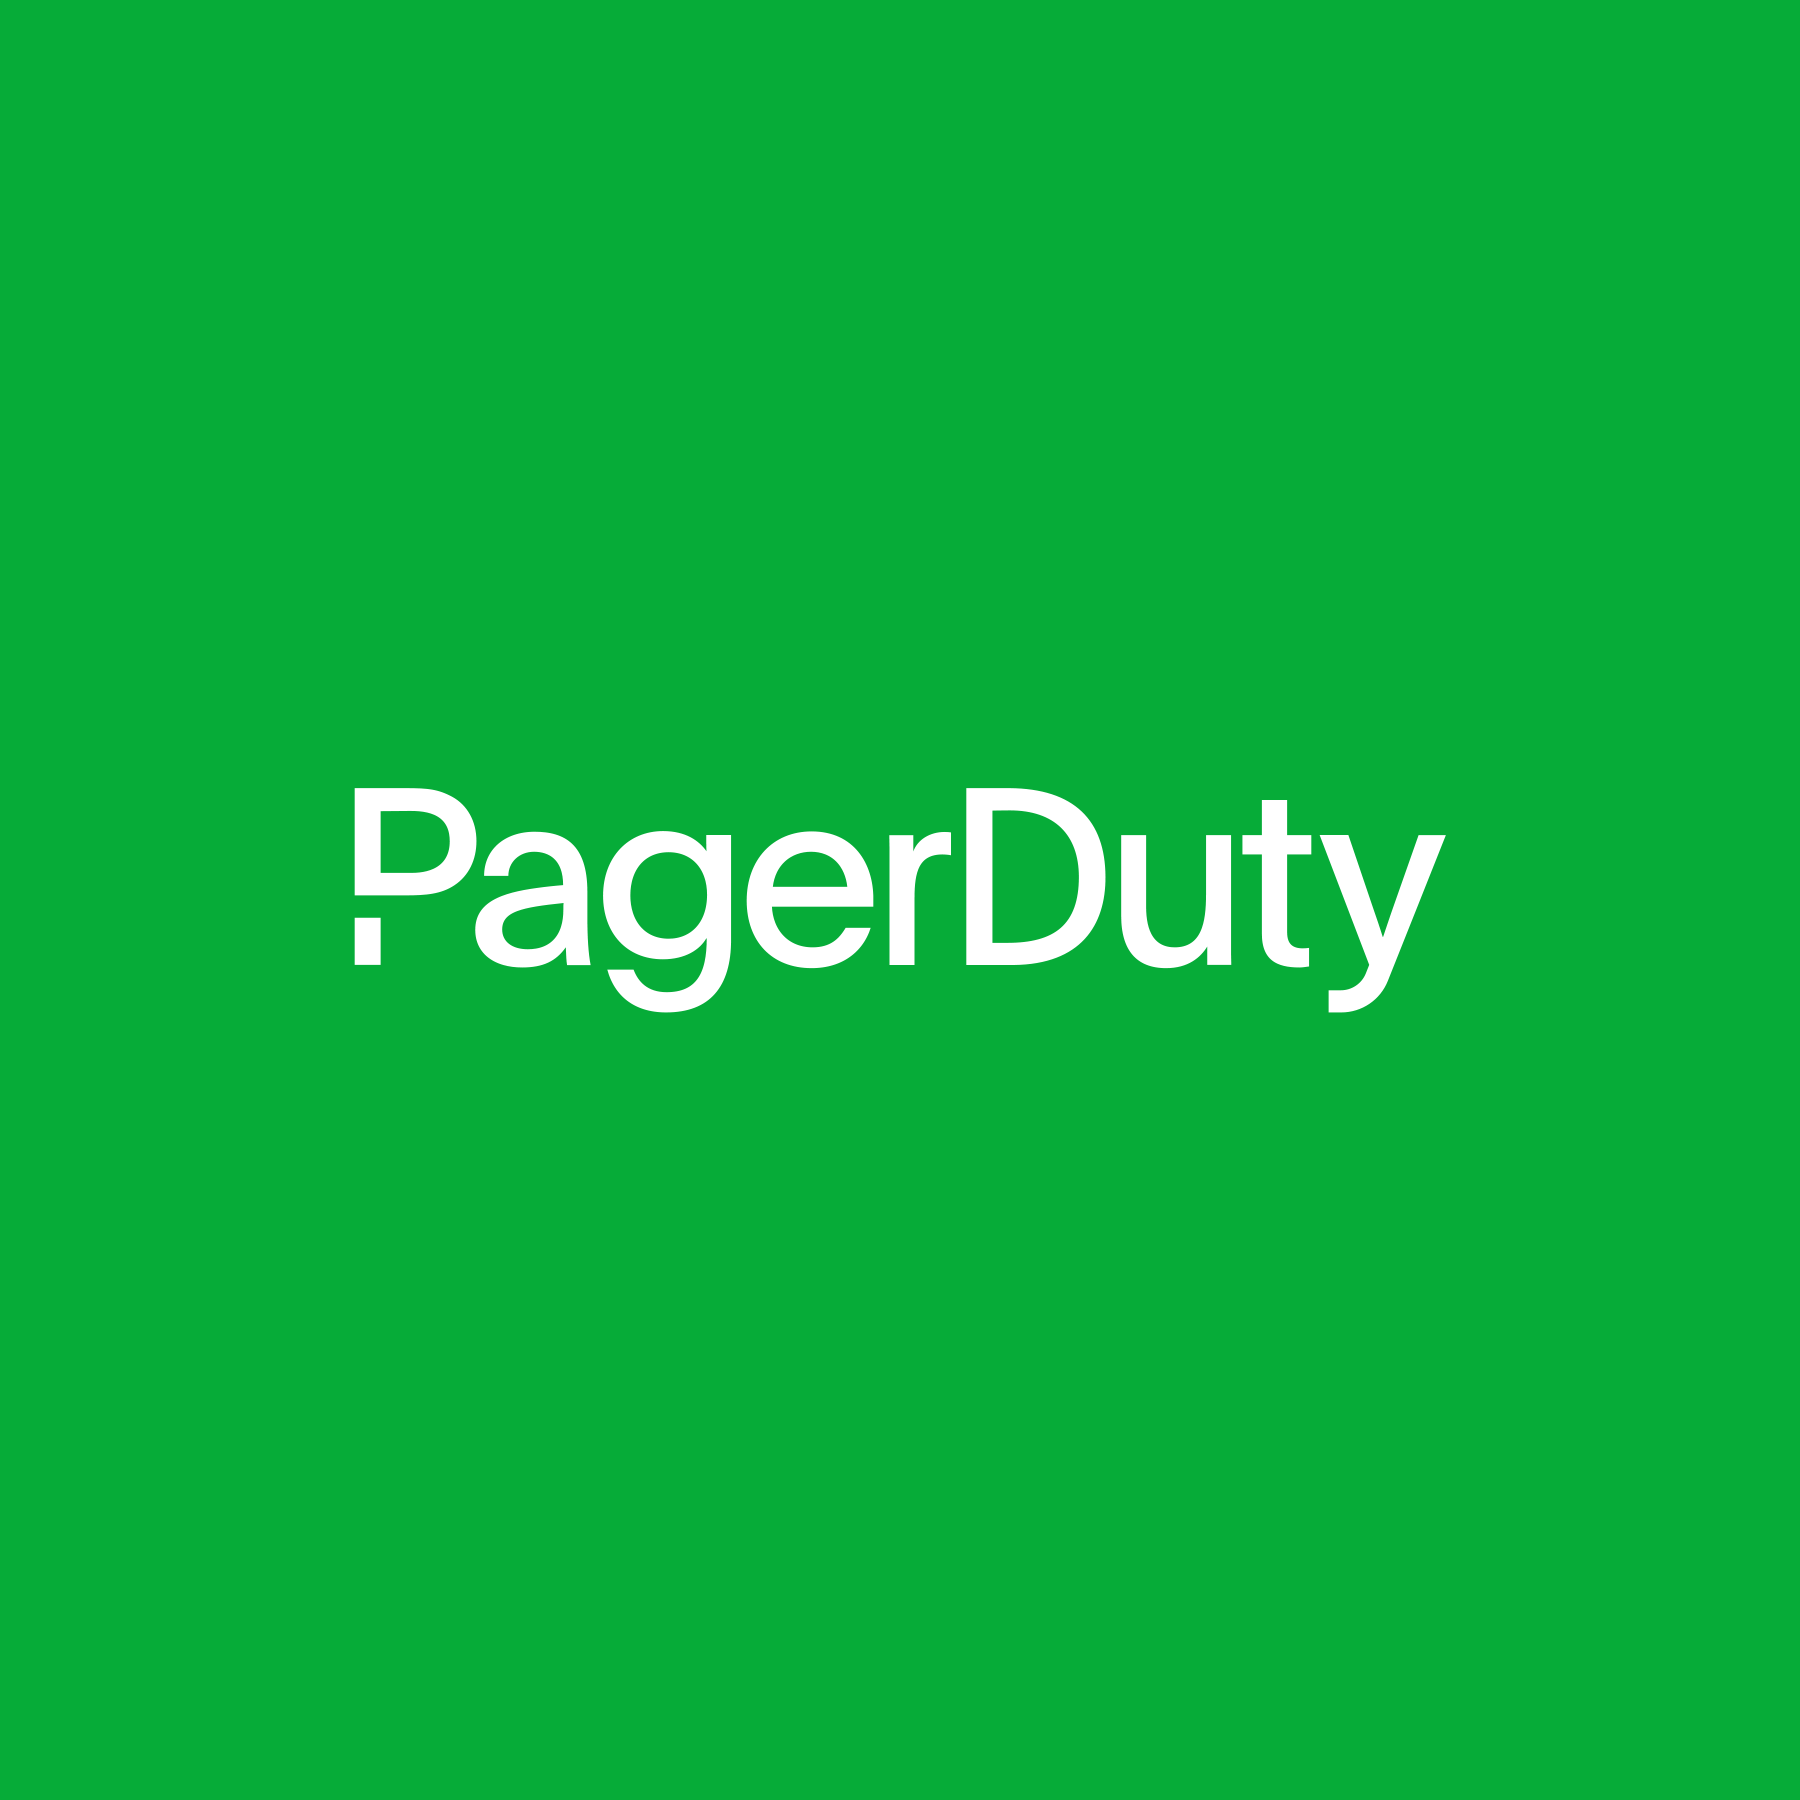 Part of our mission at PagerDuty is to help businesses “anticipate the unexpected in an unpredictable world.” Over the last year, the macro enviro